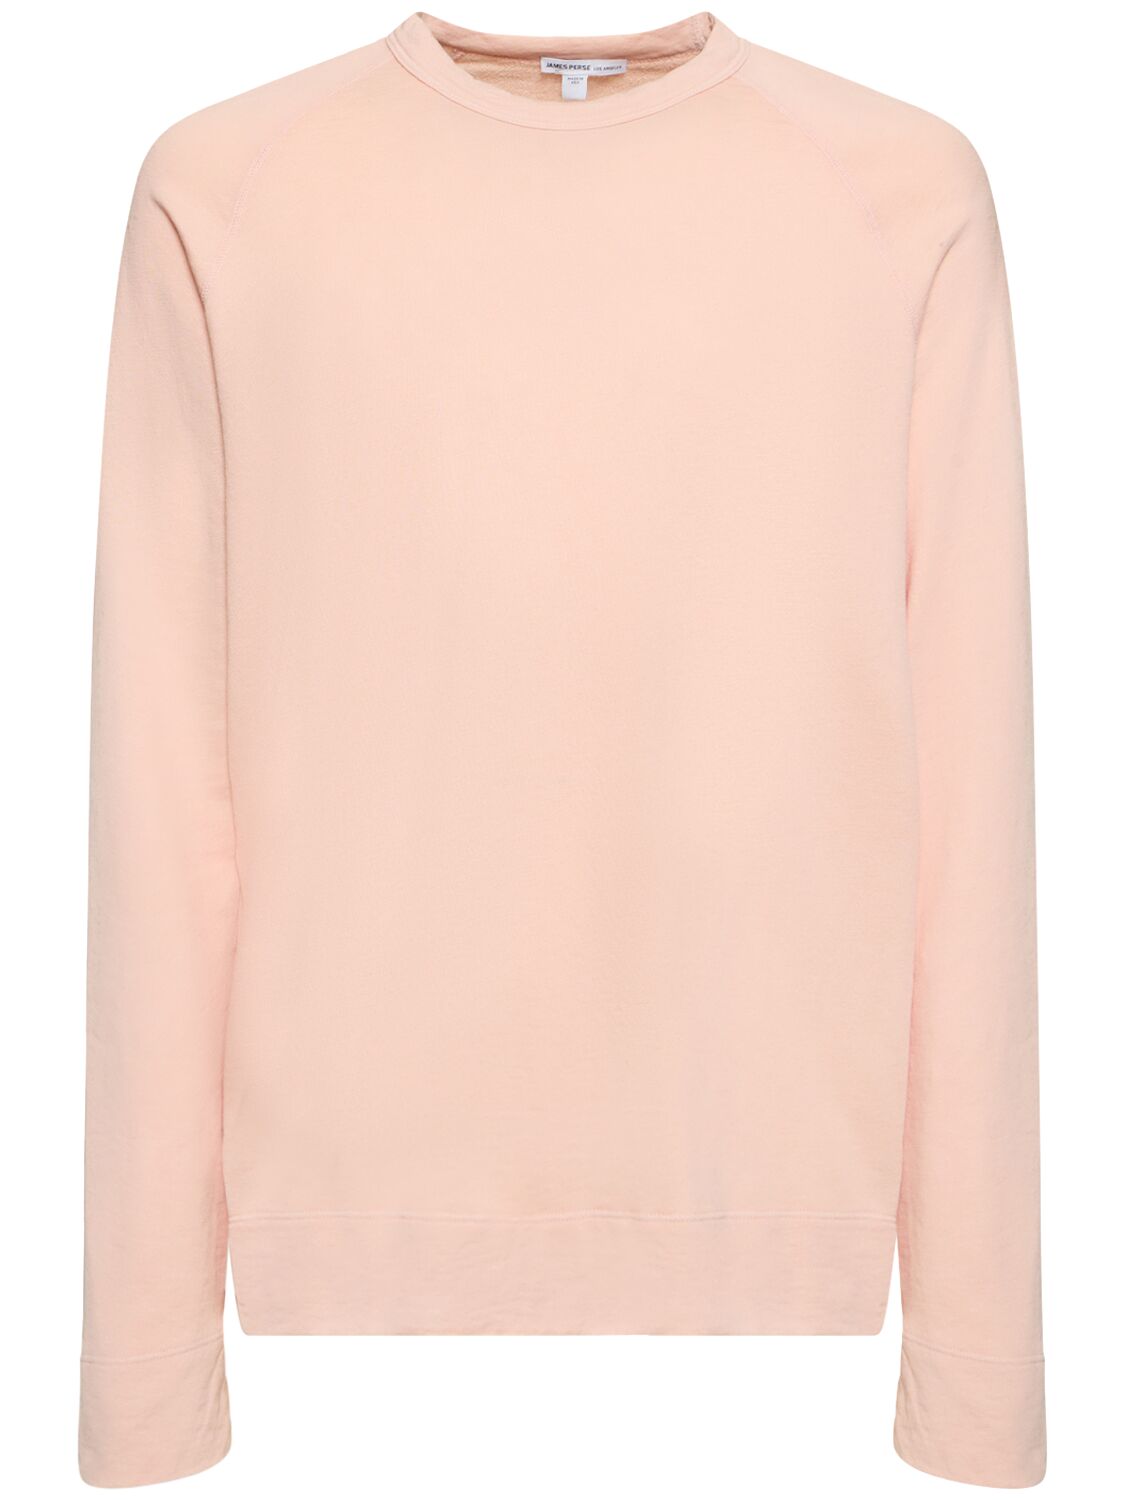 James Perse Vintage French Terry Cotton Sweatshirt In Pink